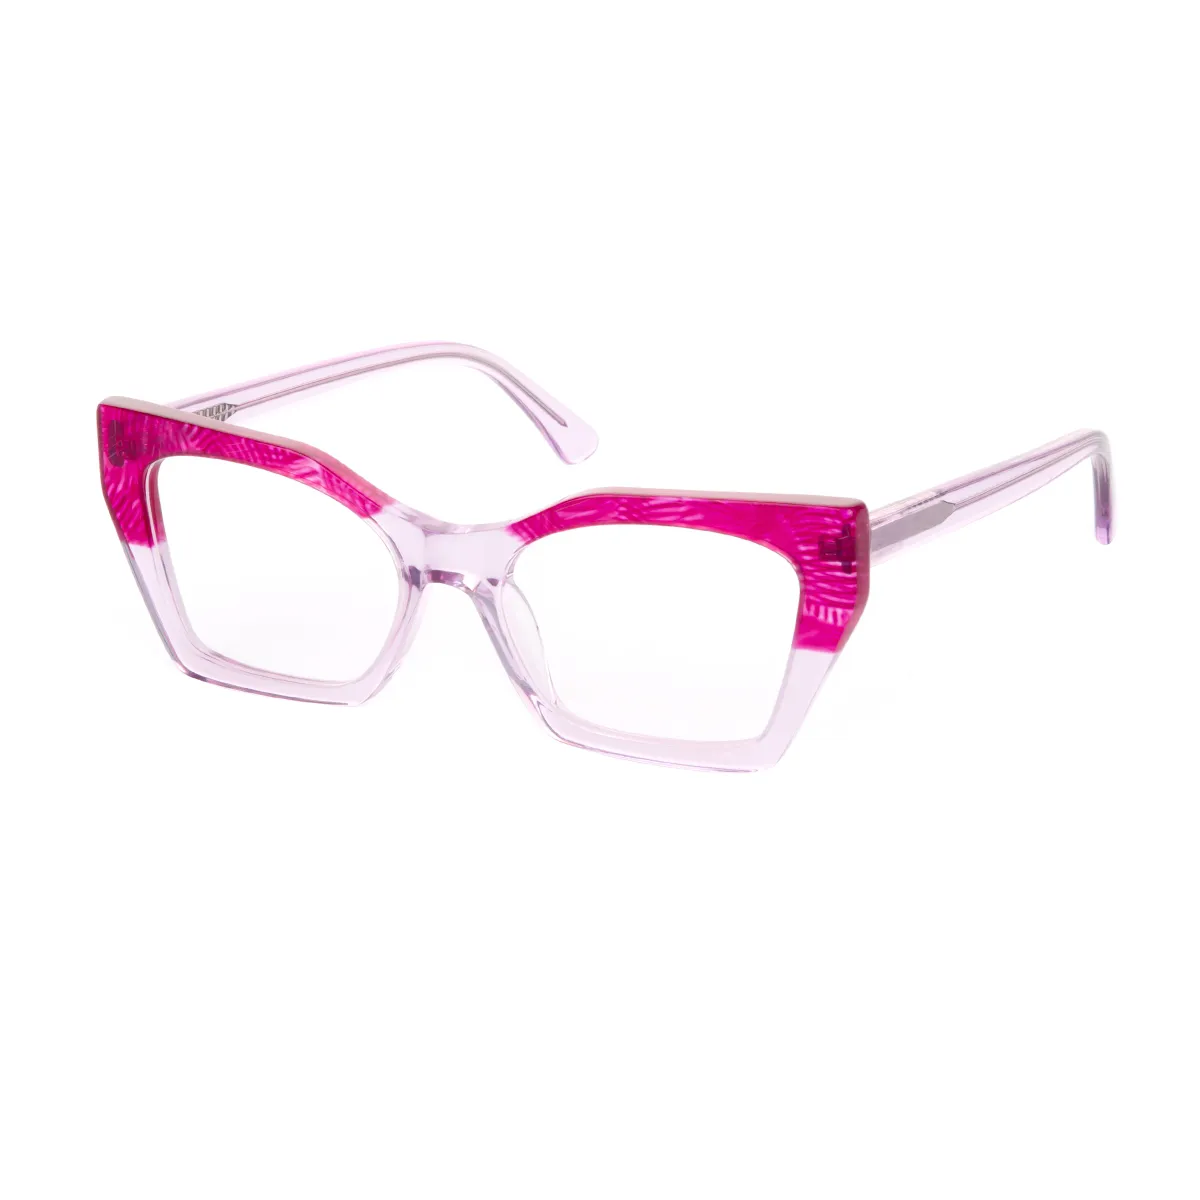 Young - Cat-eye  Glasses for Women